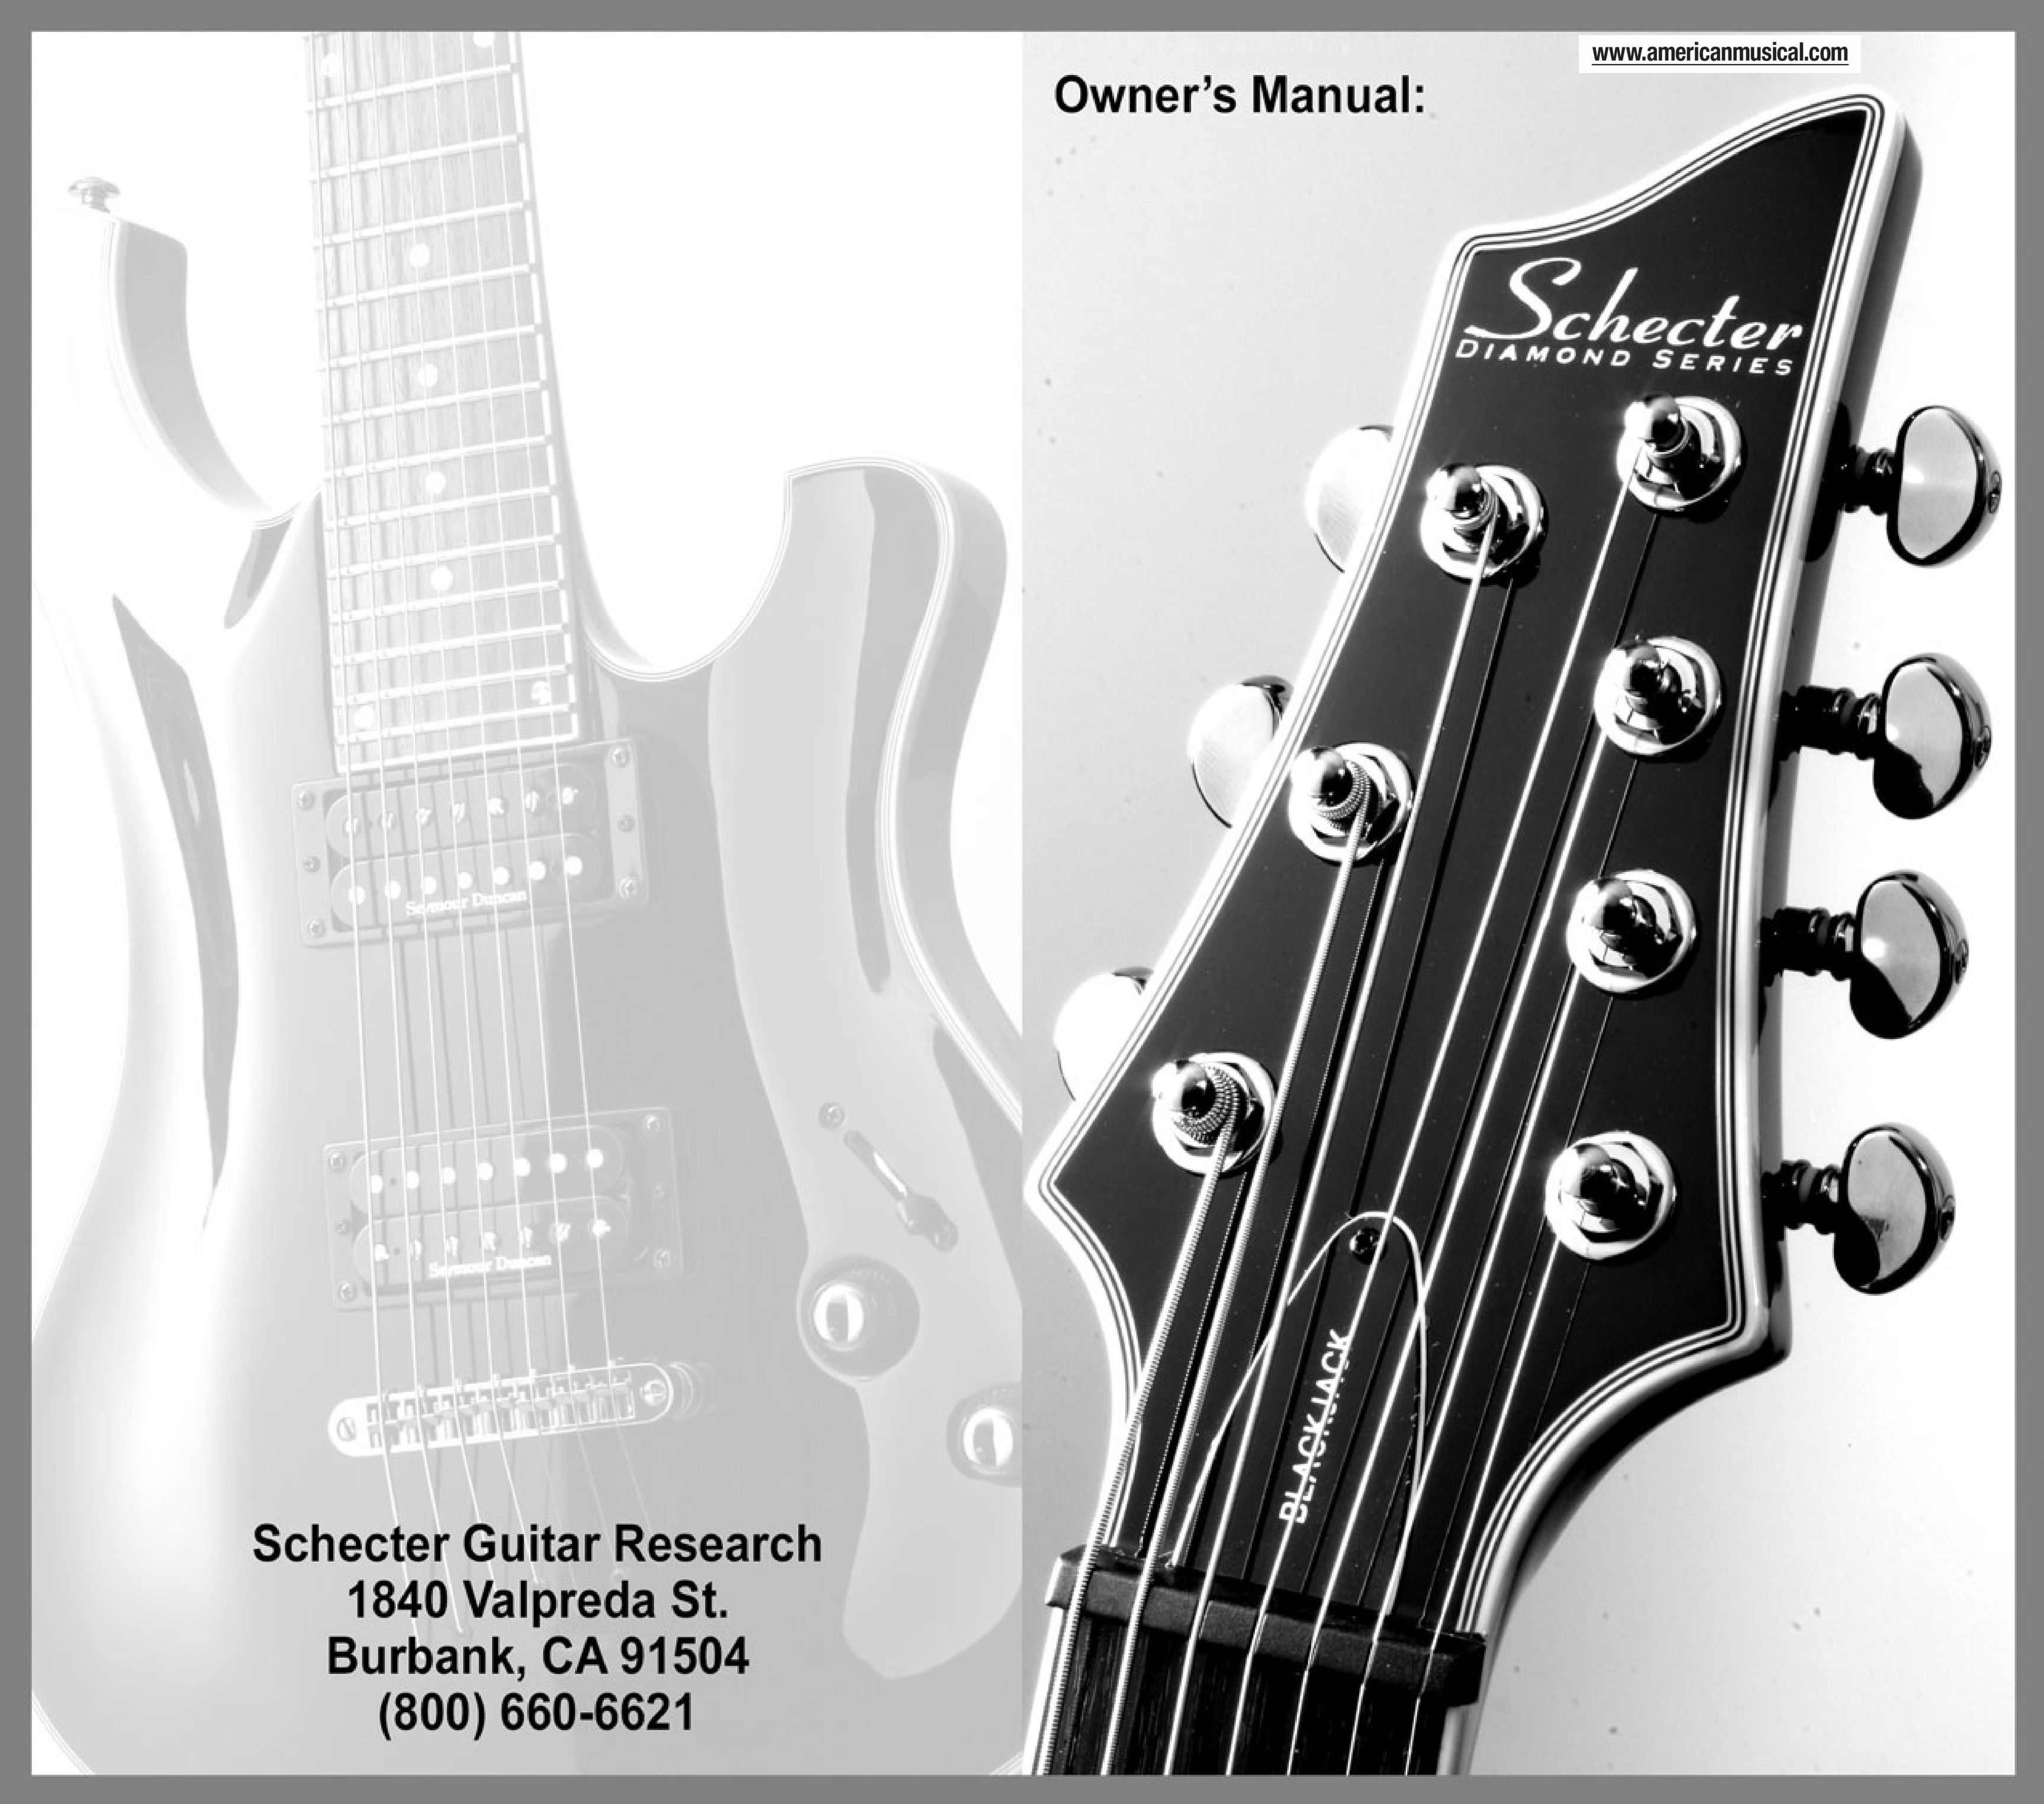 Schecter C-1 Stereo Amplifier User Manual